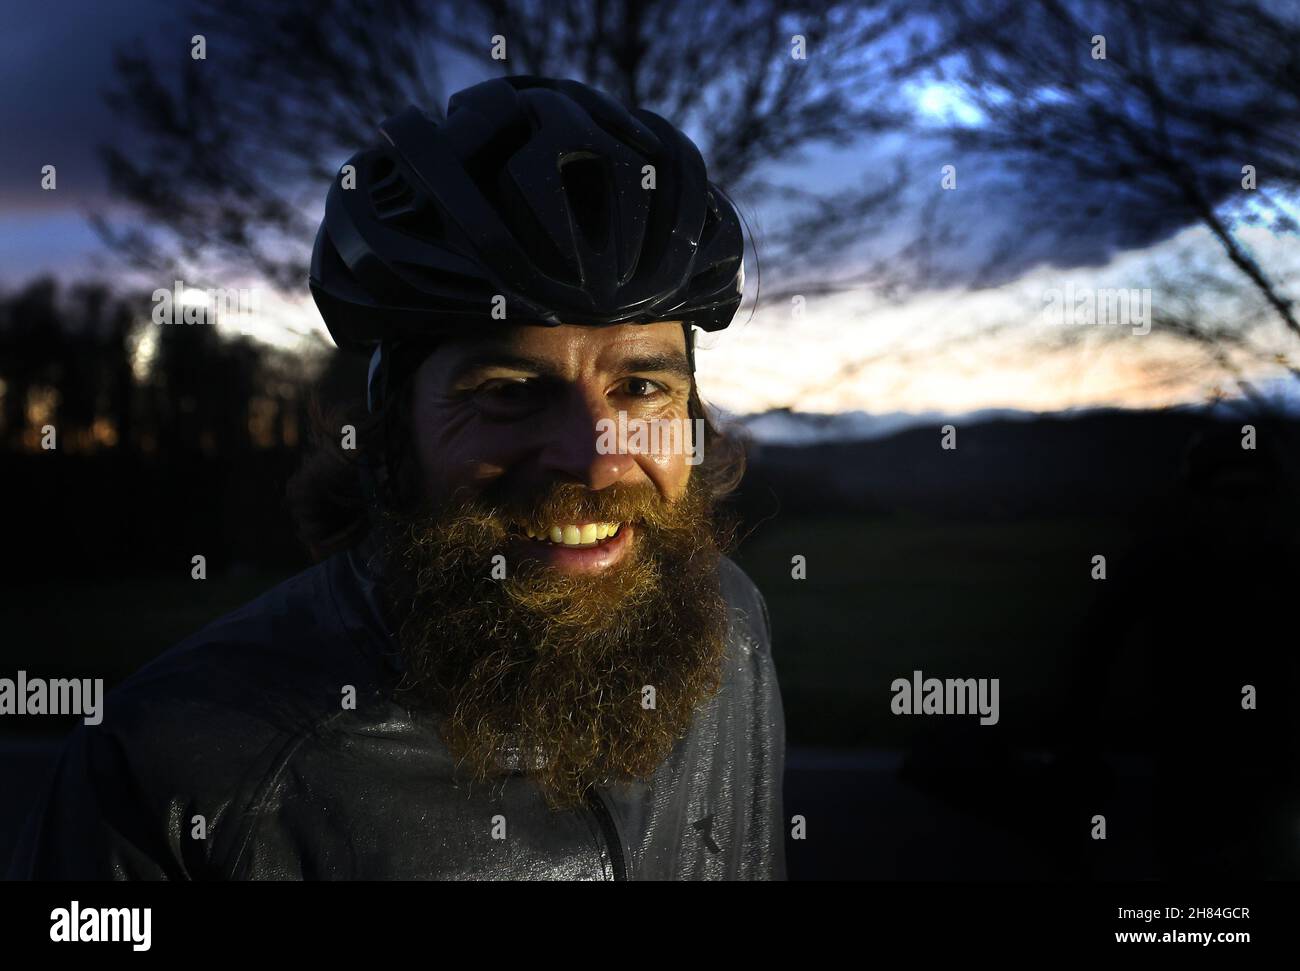 Print mærke Blind Singen, Germany. 27th Nov, 2021. Extreme athlete Jonas Deichmann stands on  a dirt road with his bike after crossing the border from Switzerland.  Deichmann arrived in Baden-Württemberg after his triathlon around the